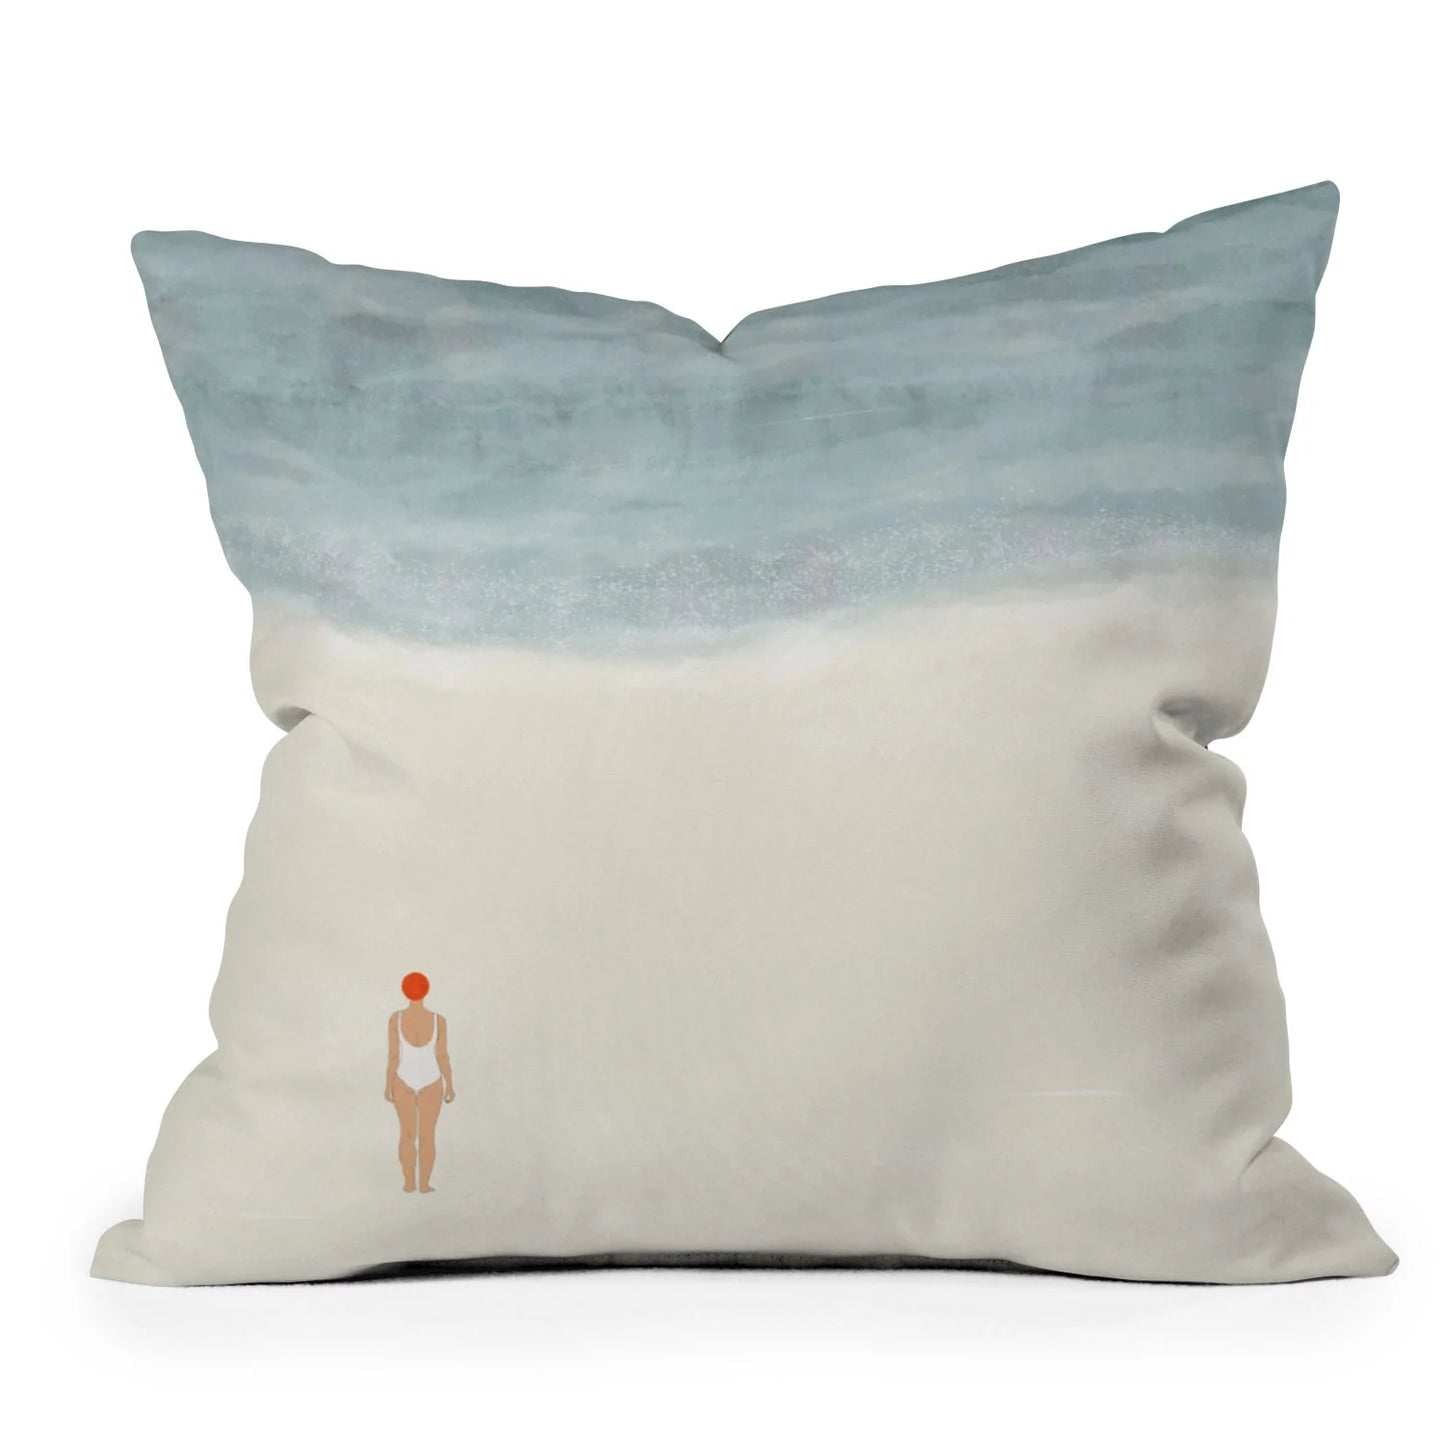 Alone with the Sea Throw Pillow